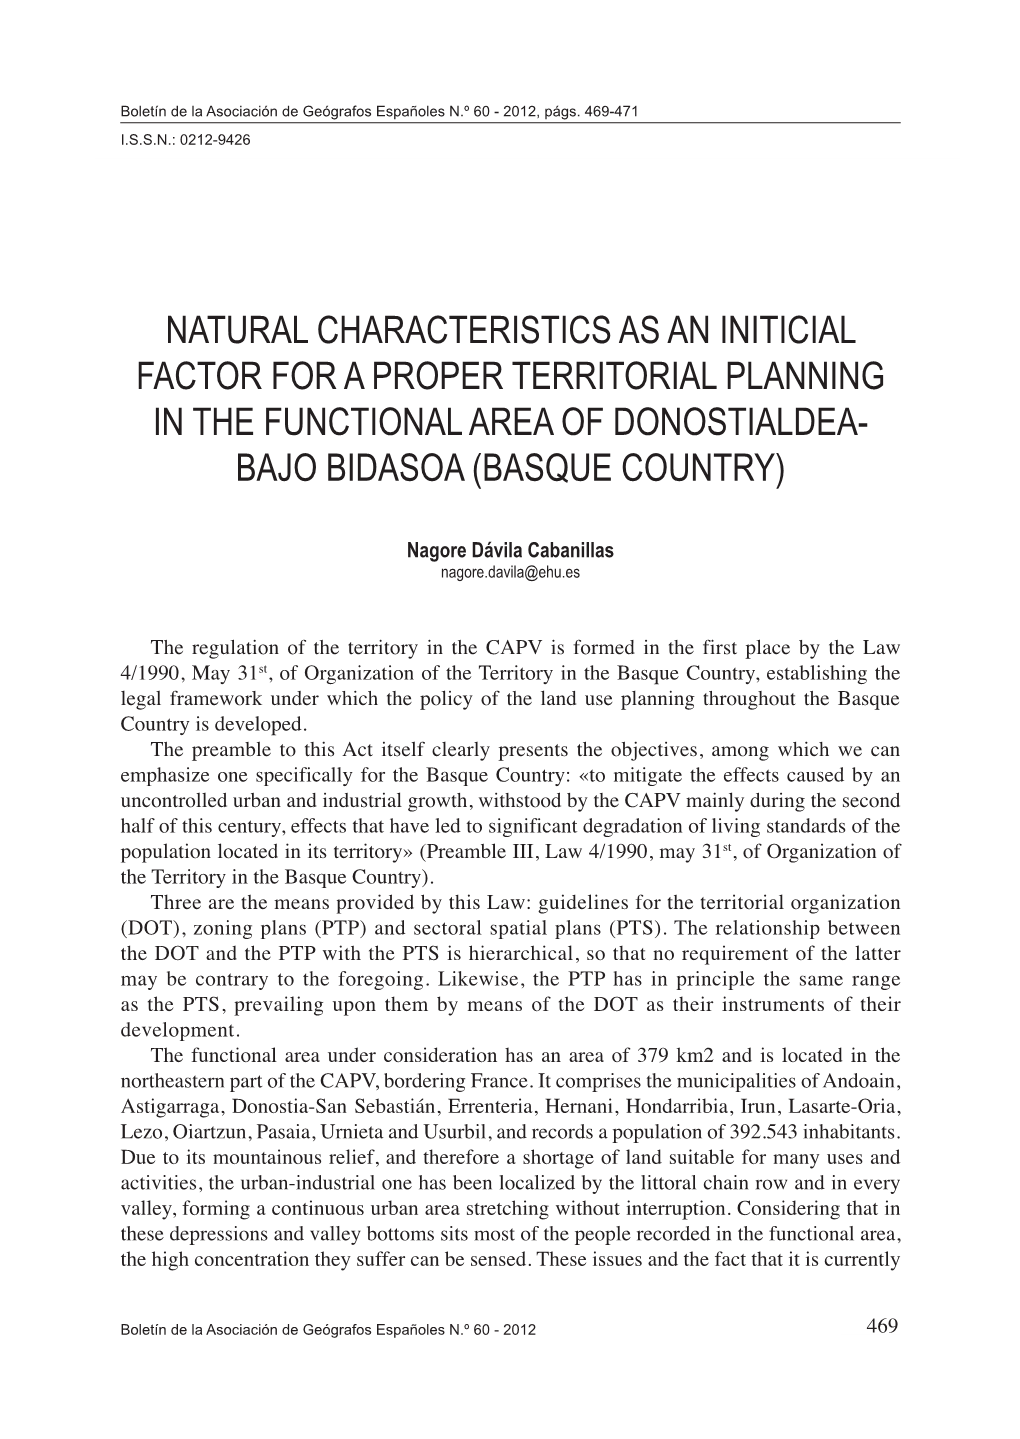 Natural Characteristics As an Initicial Factor for a Proper Territorial Planning in the Functional Area of Donostialdea- Bajo Bidasoa (Basque Country)